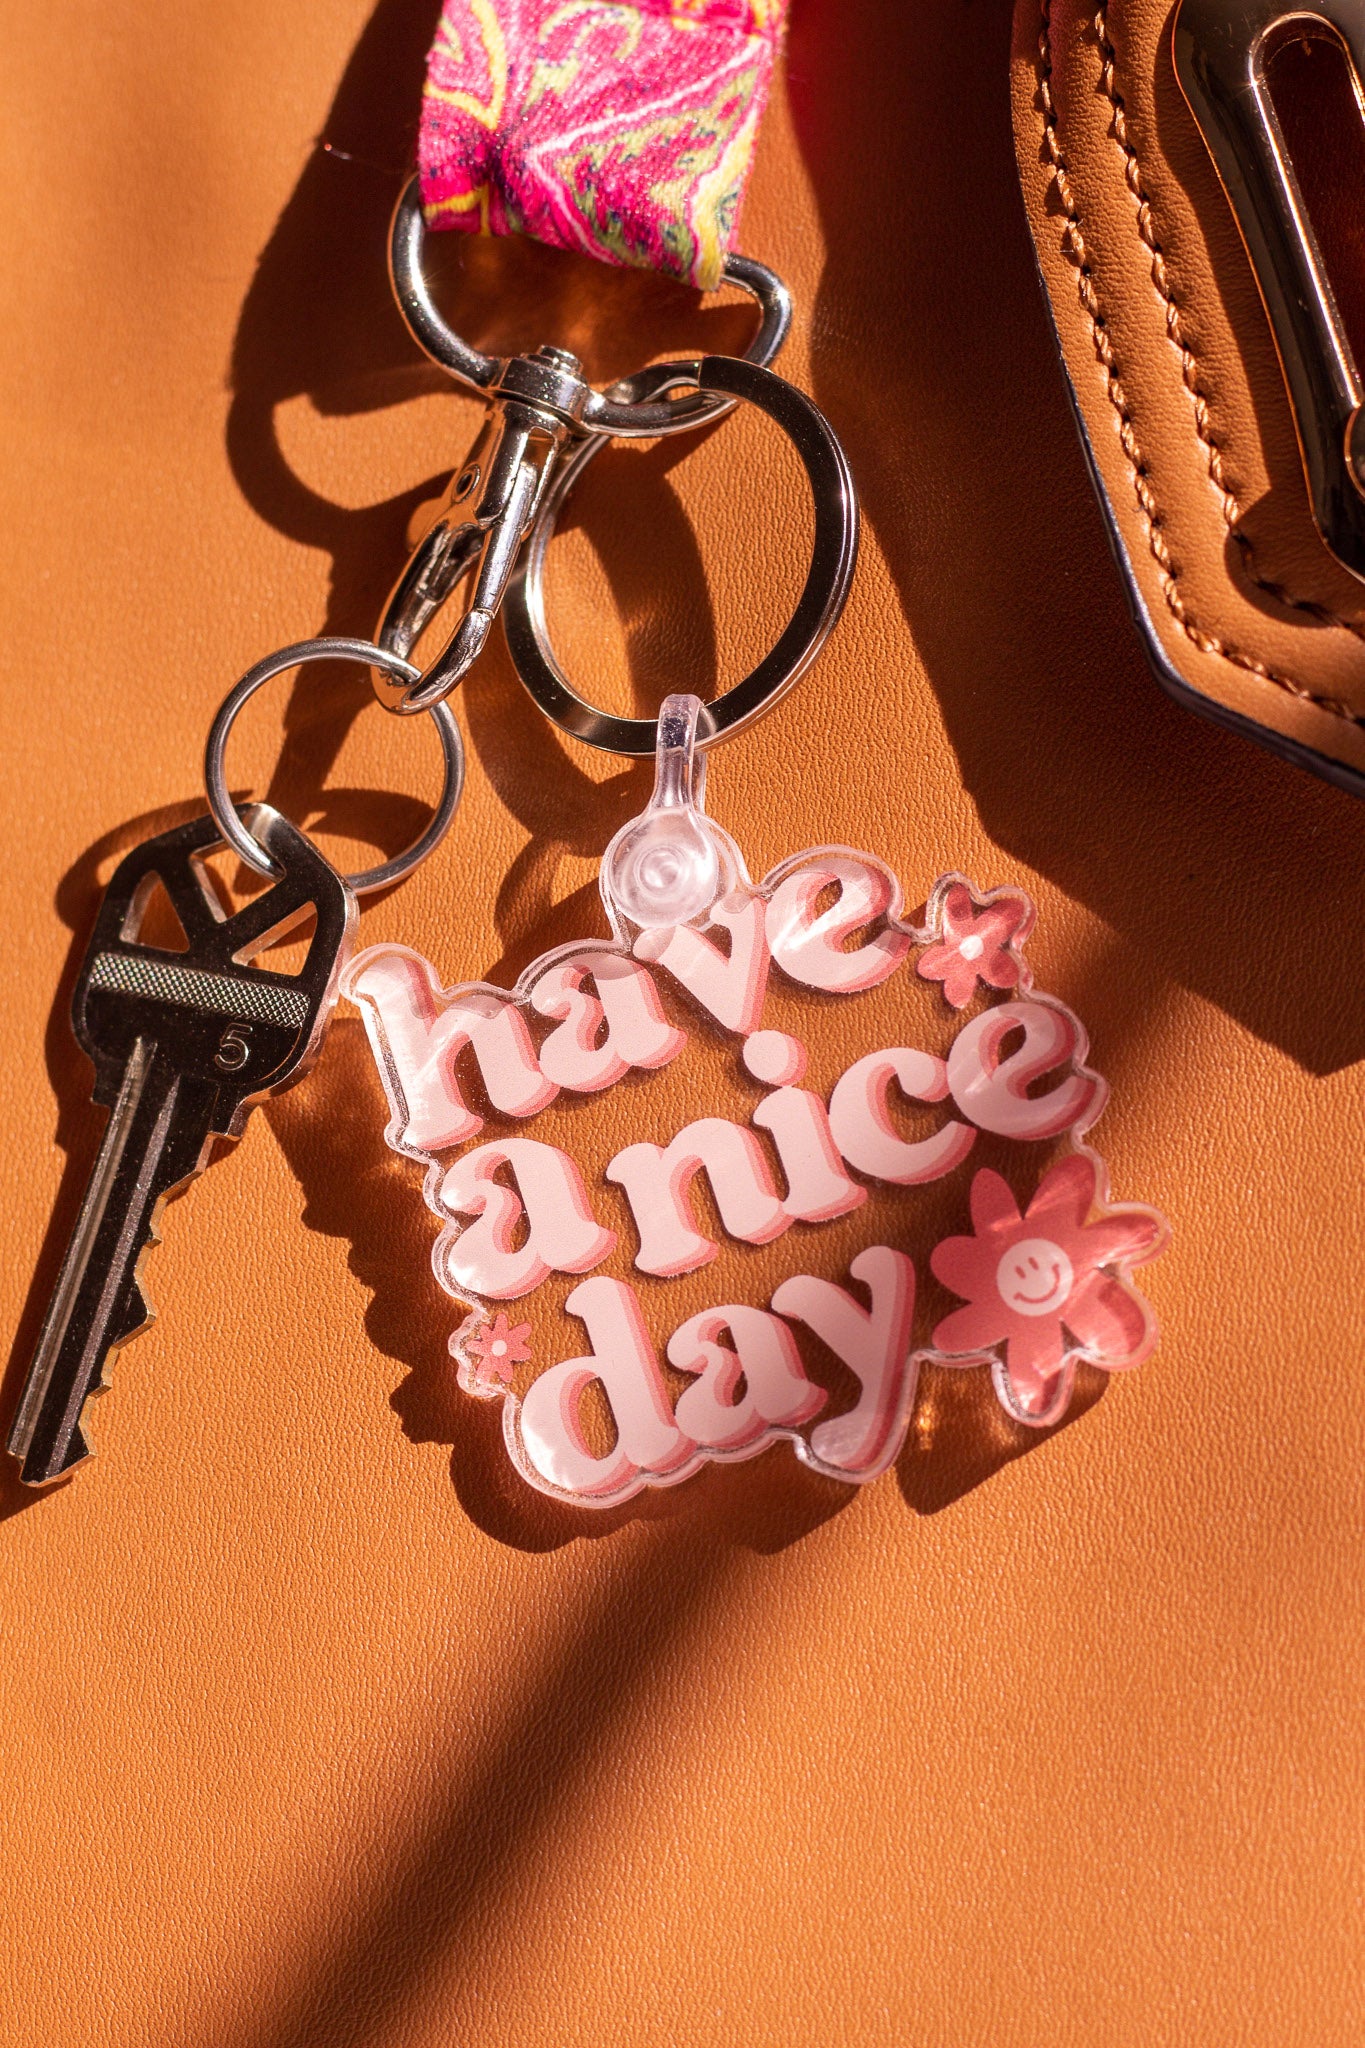 Have a Nice Day Keychain sitting on purse